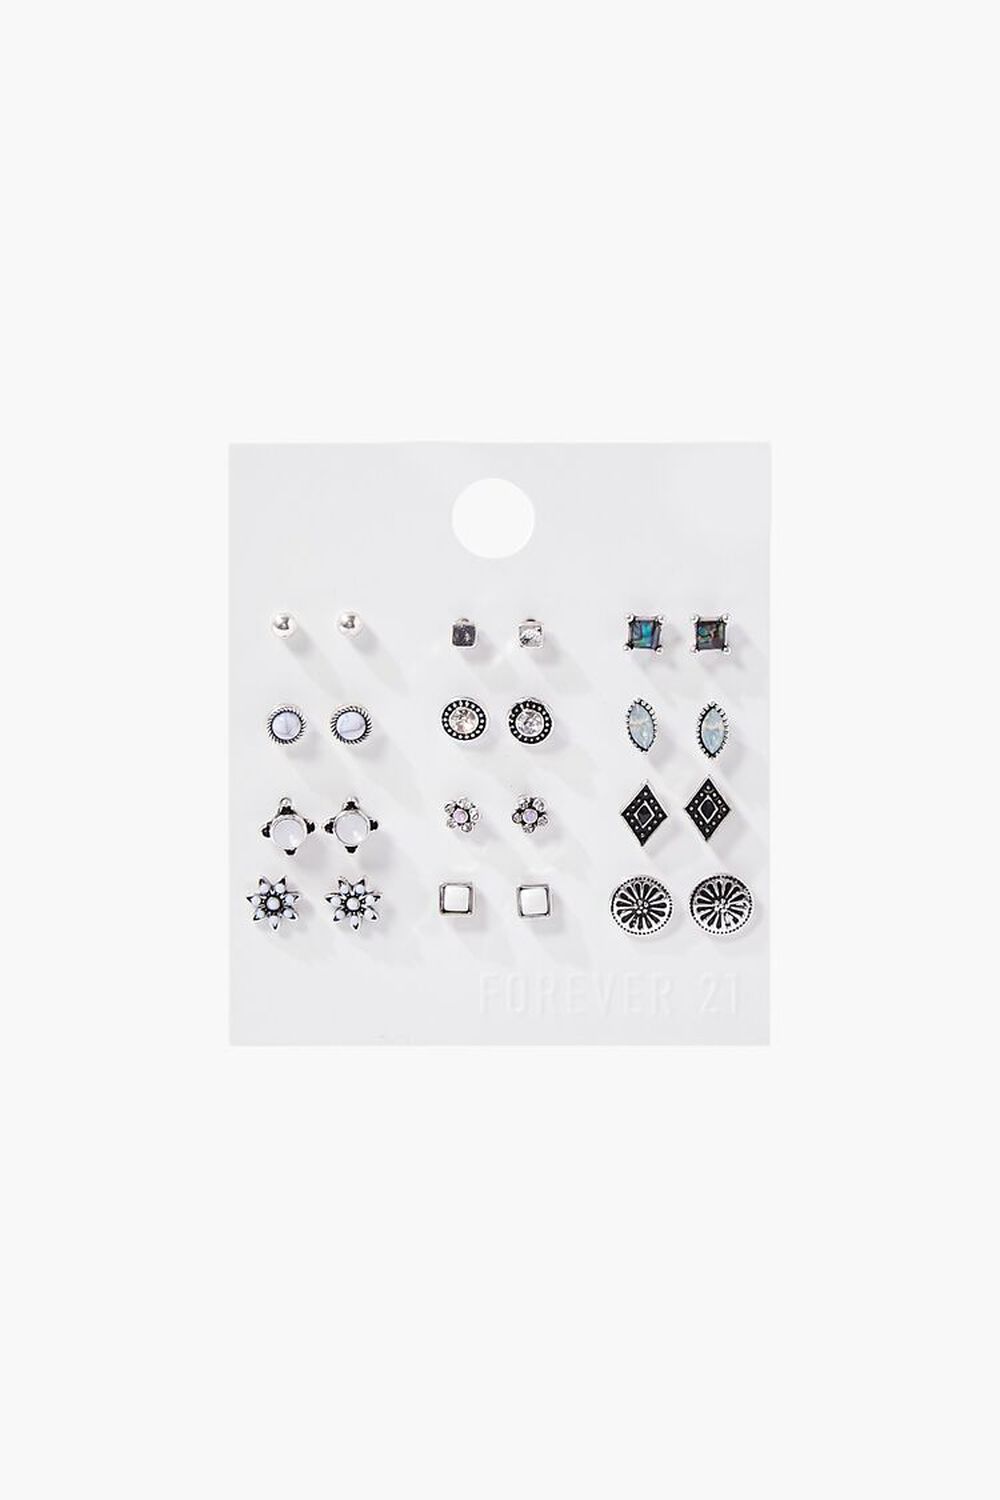 SILVER Faux Crystal Stud Earring Set, image 1